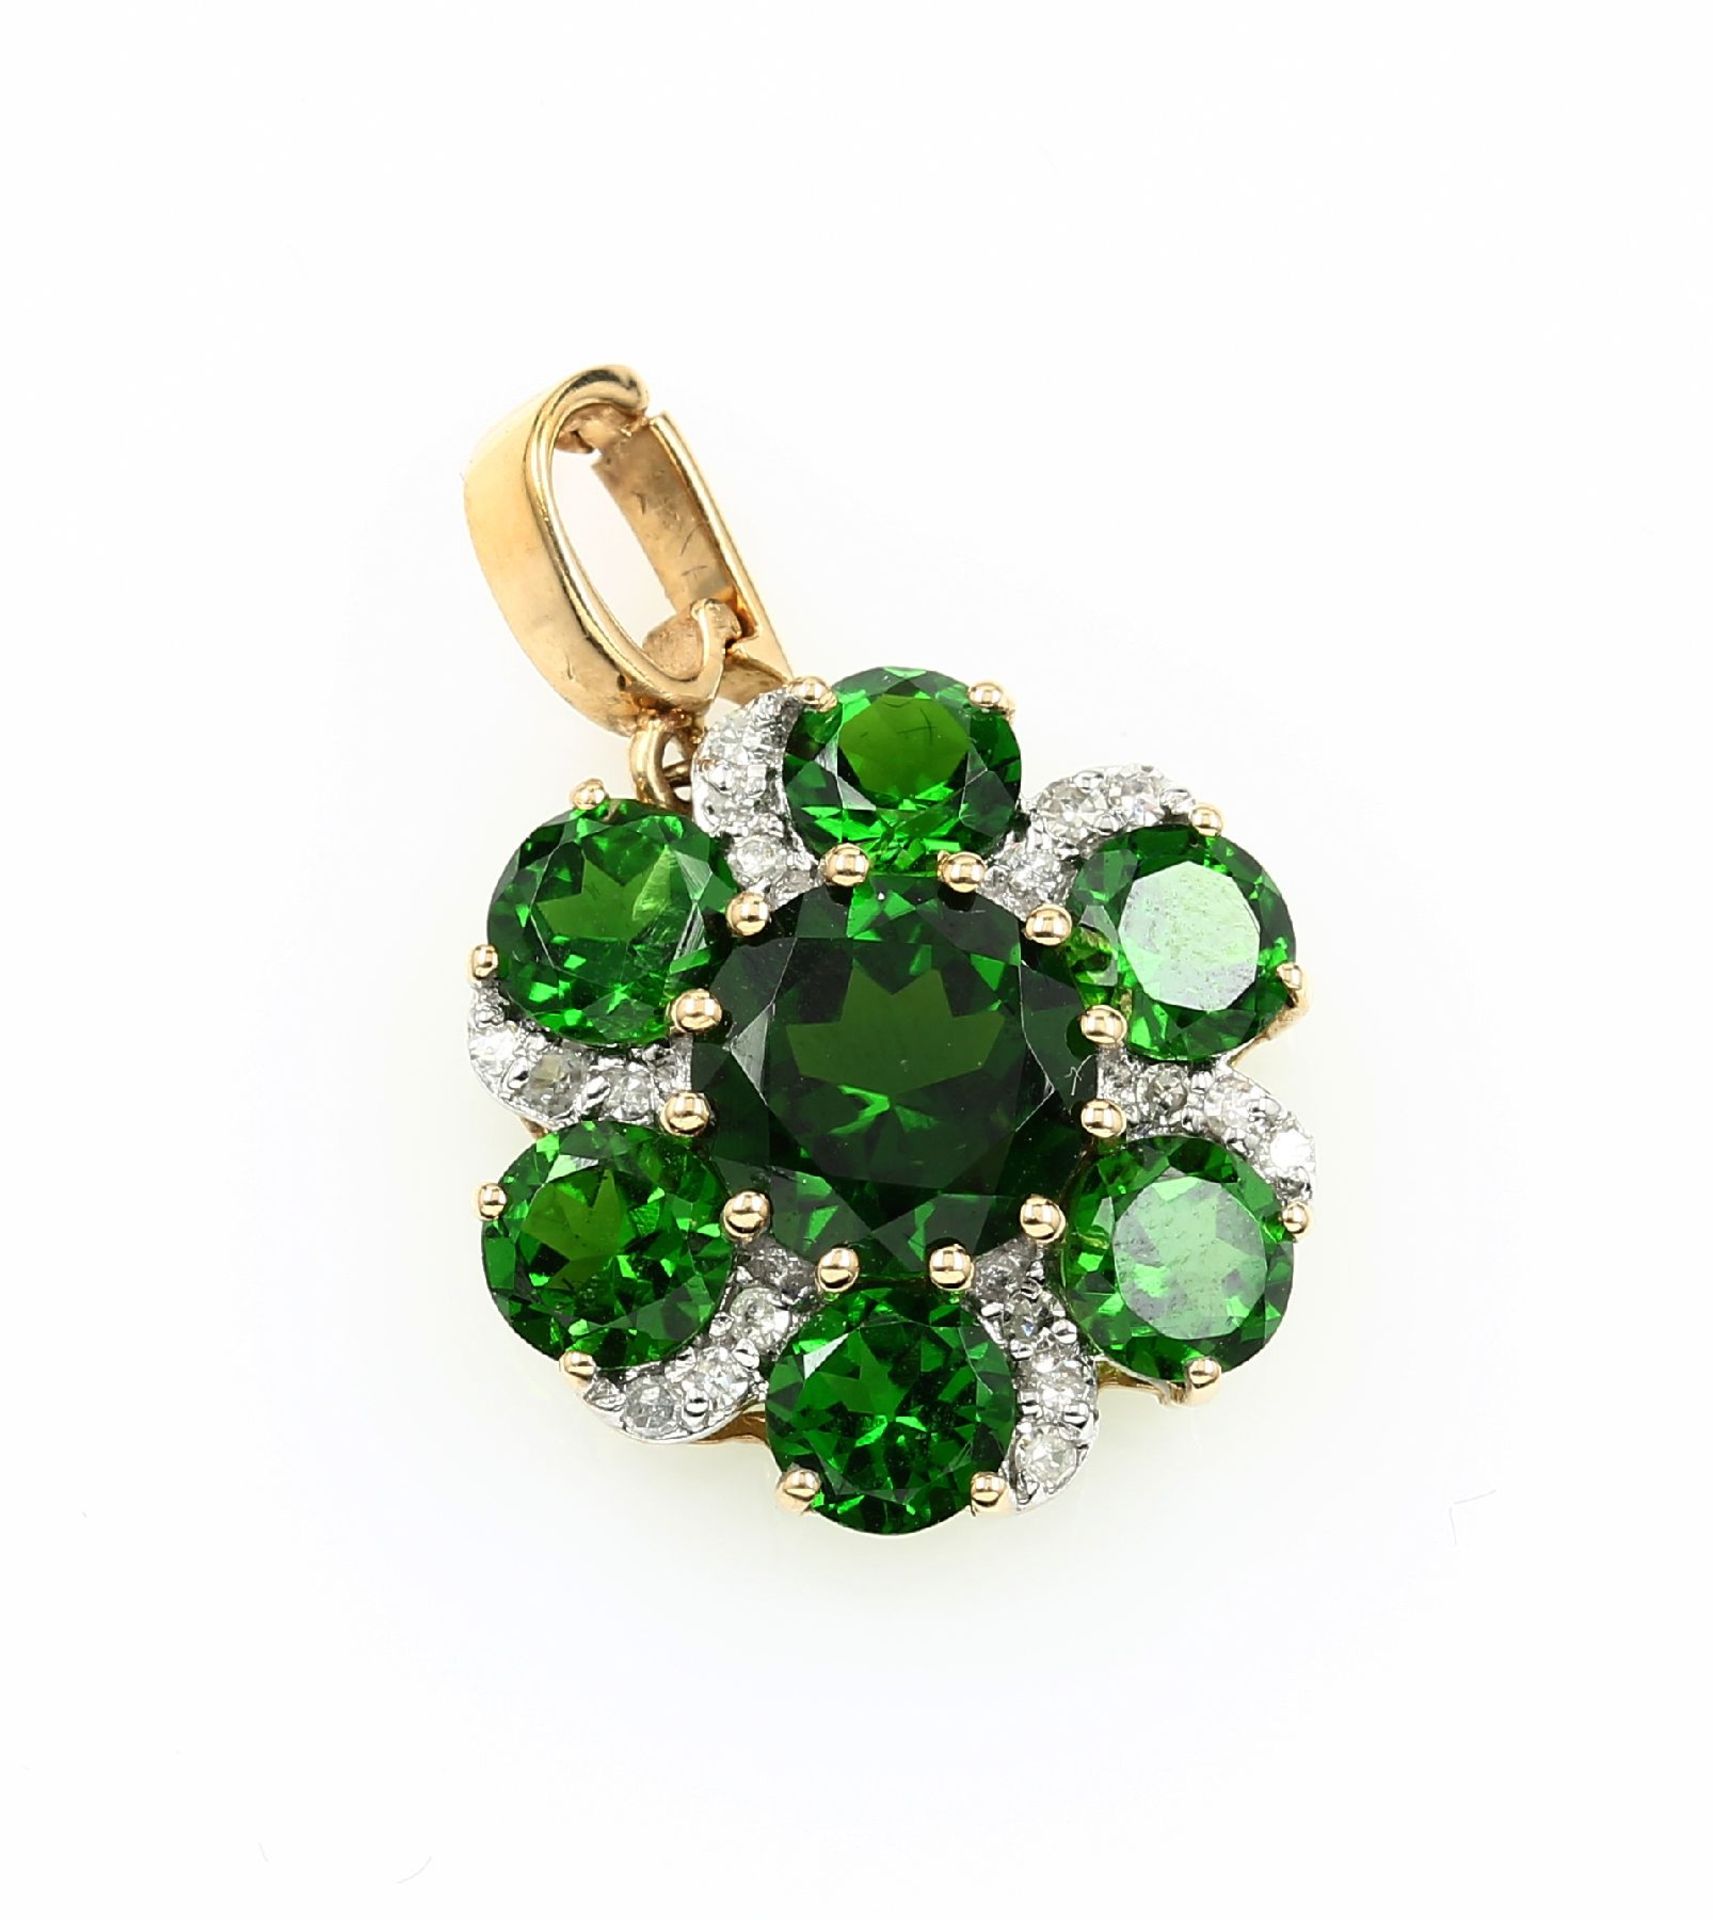 14 kt gold pendant with diopside and brilliants , YG 585/000, 7 round bevelled Diopside 2.0 ct,